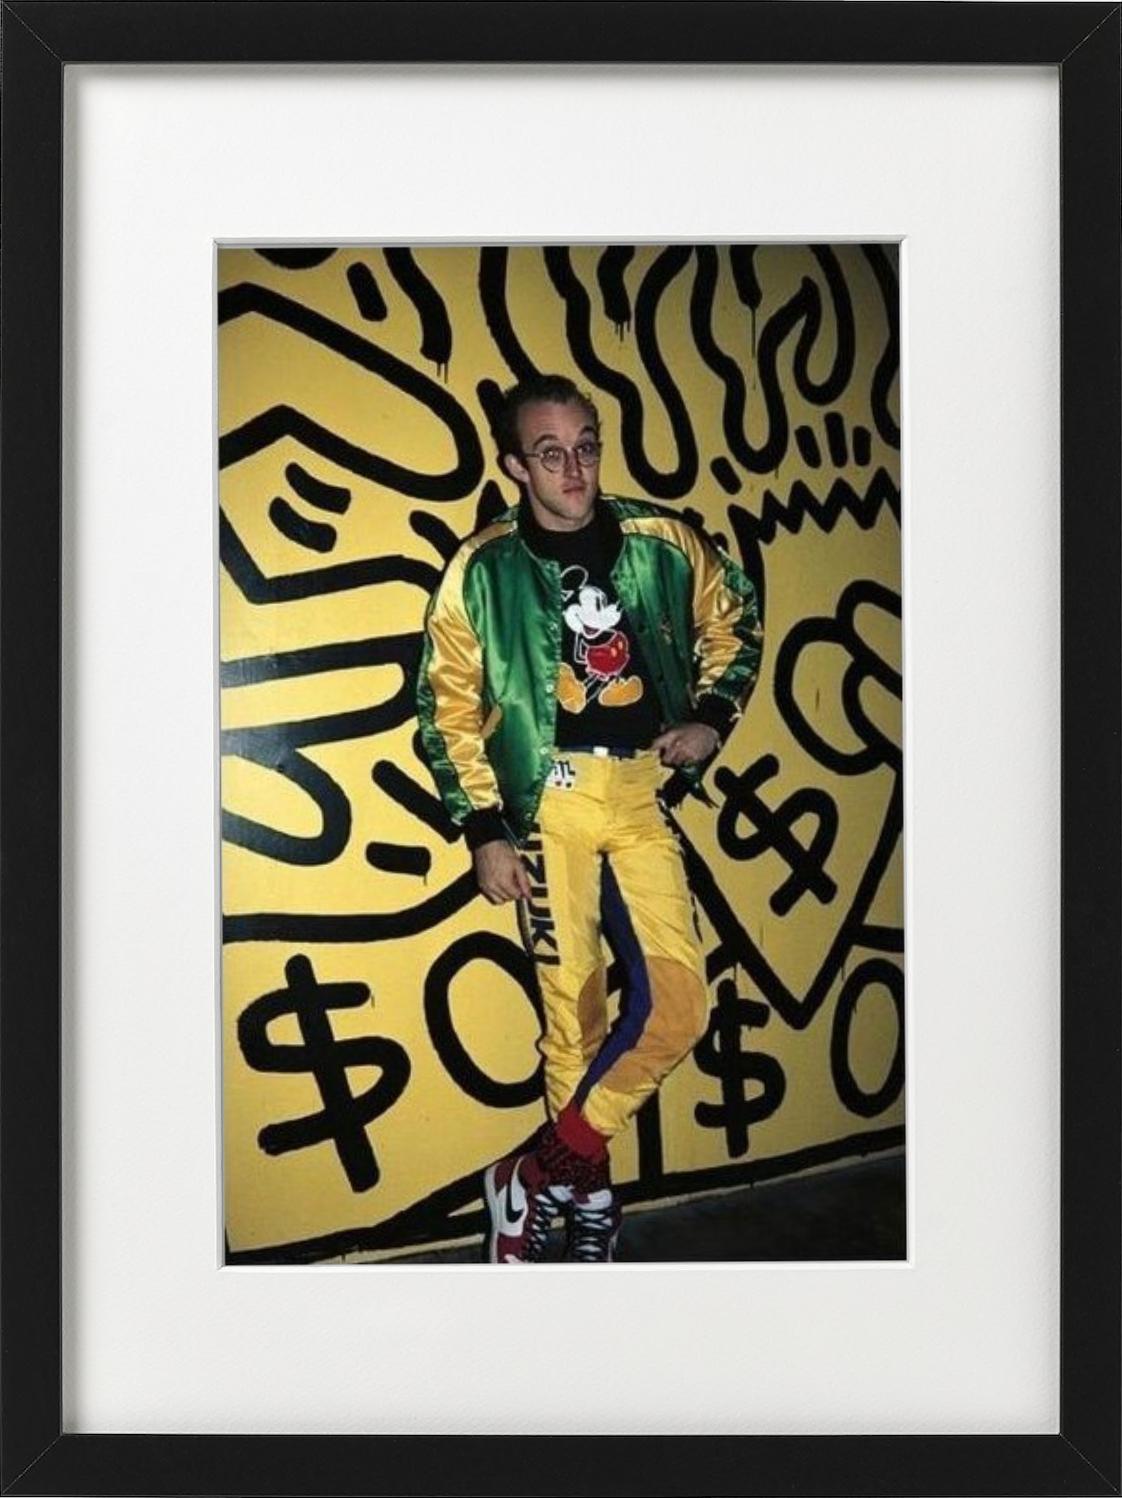 'Keith Haring' - in front of his work, fine art photography, 1985 - Contemporary Photograph by Roxanne Lowit